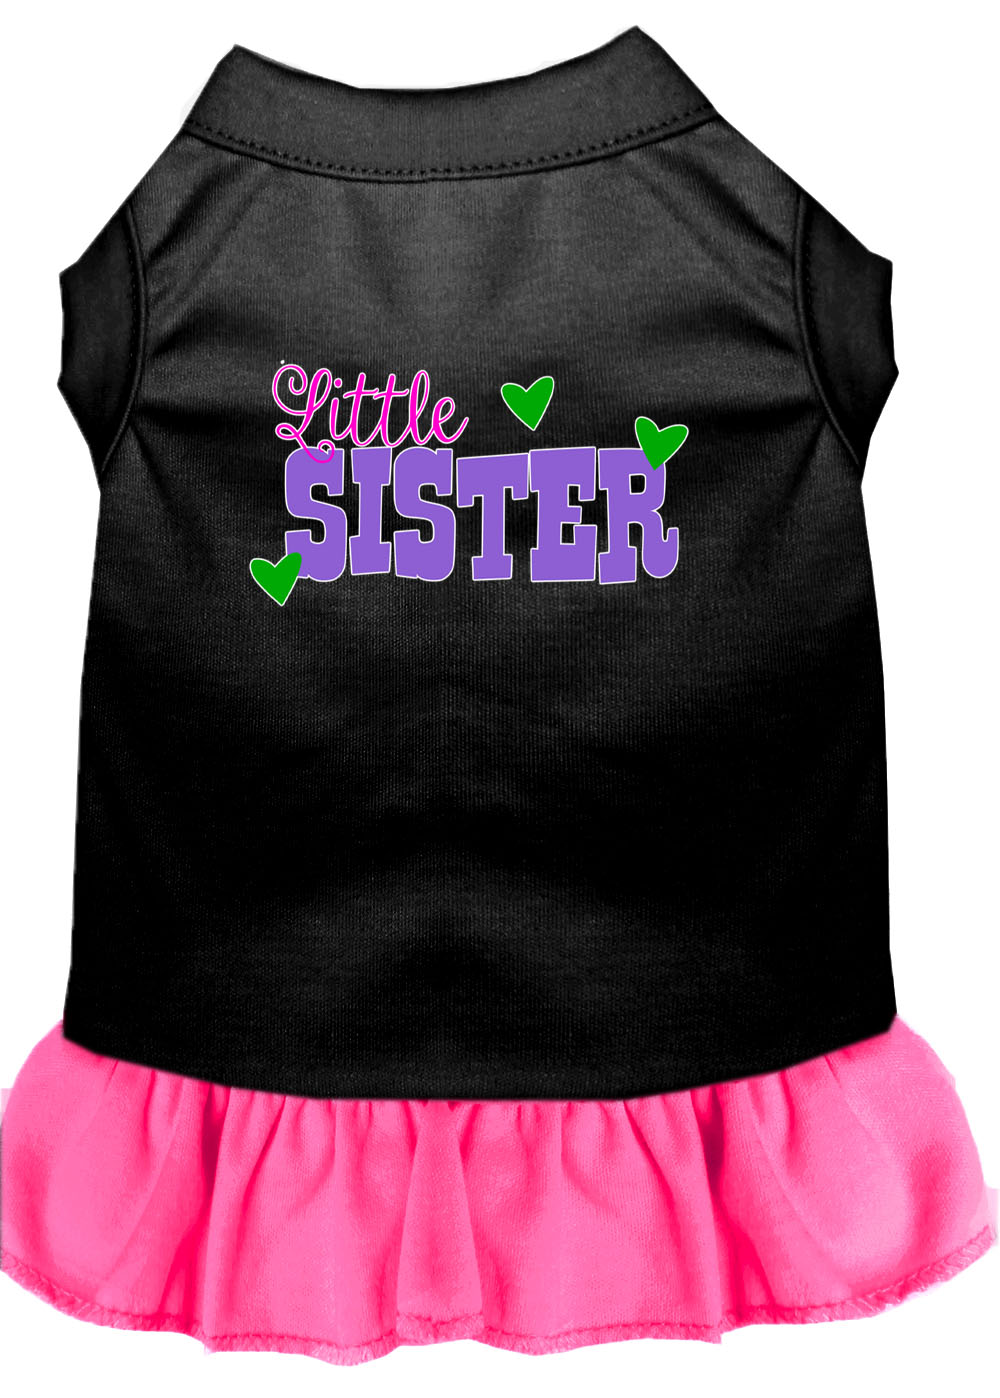 Little Sister Screen Print Dog Dress Black with Bright Pink Med